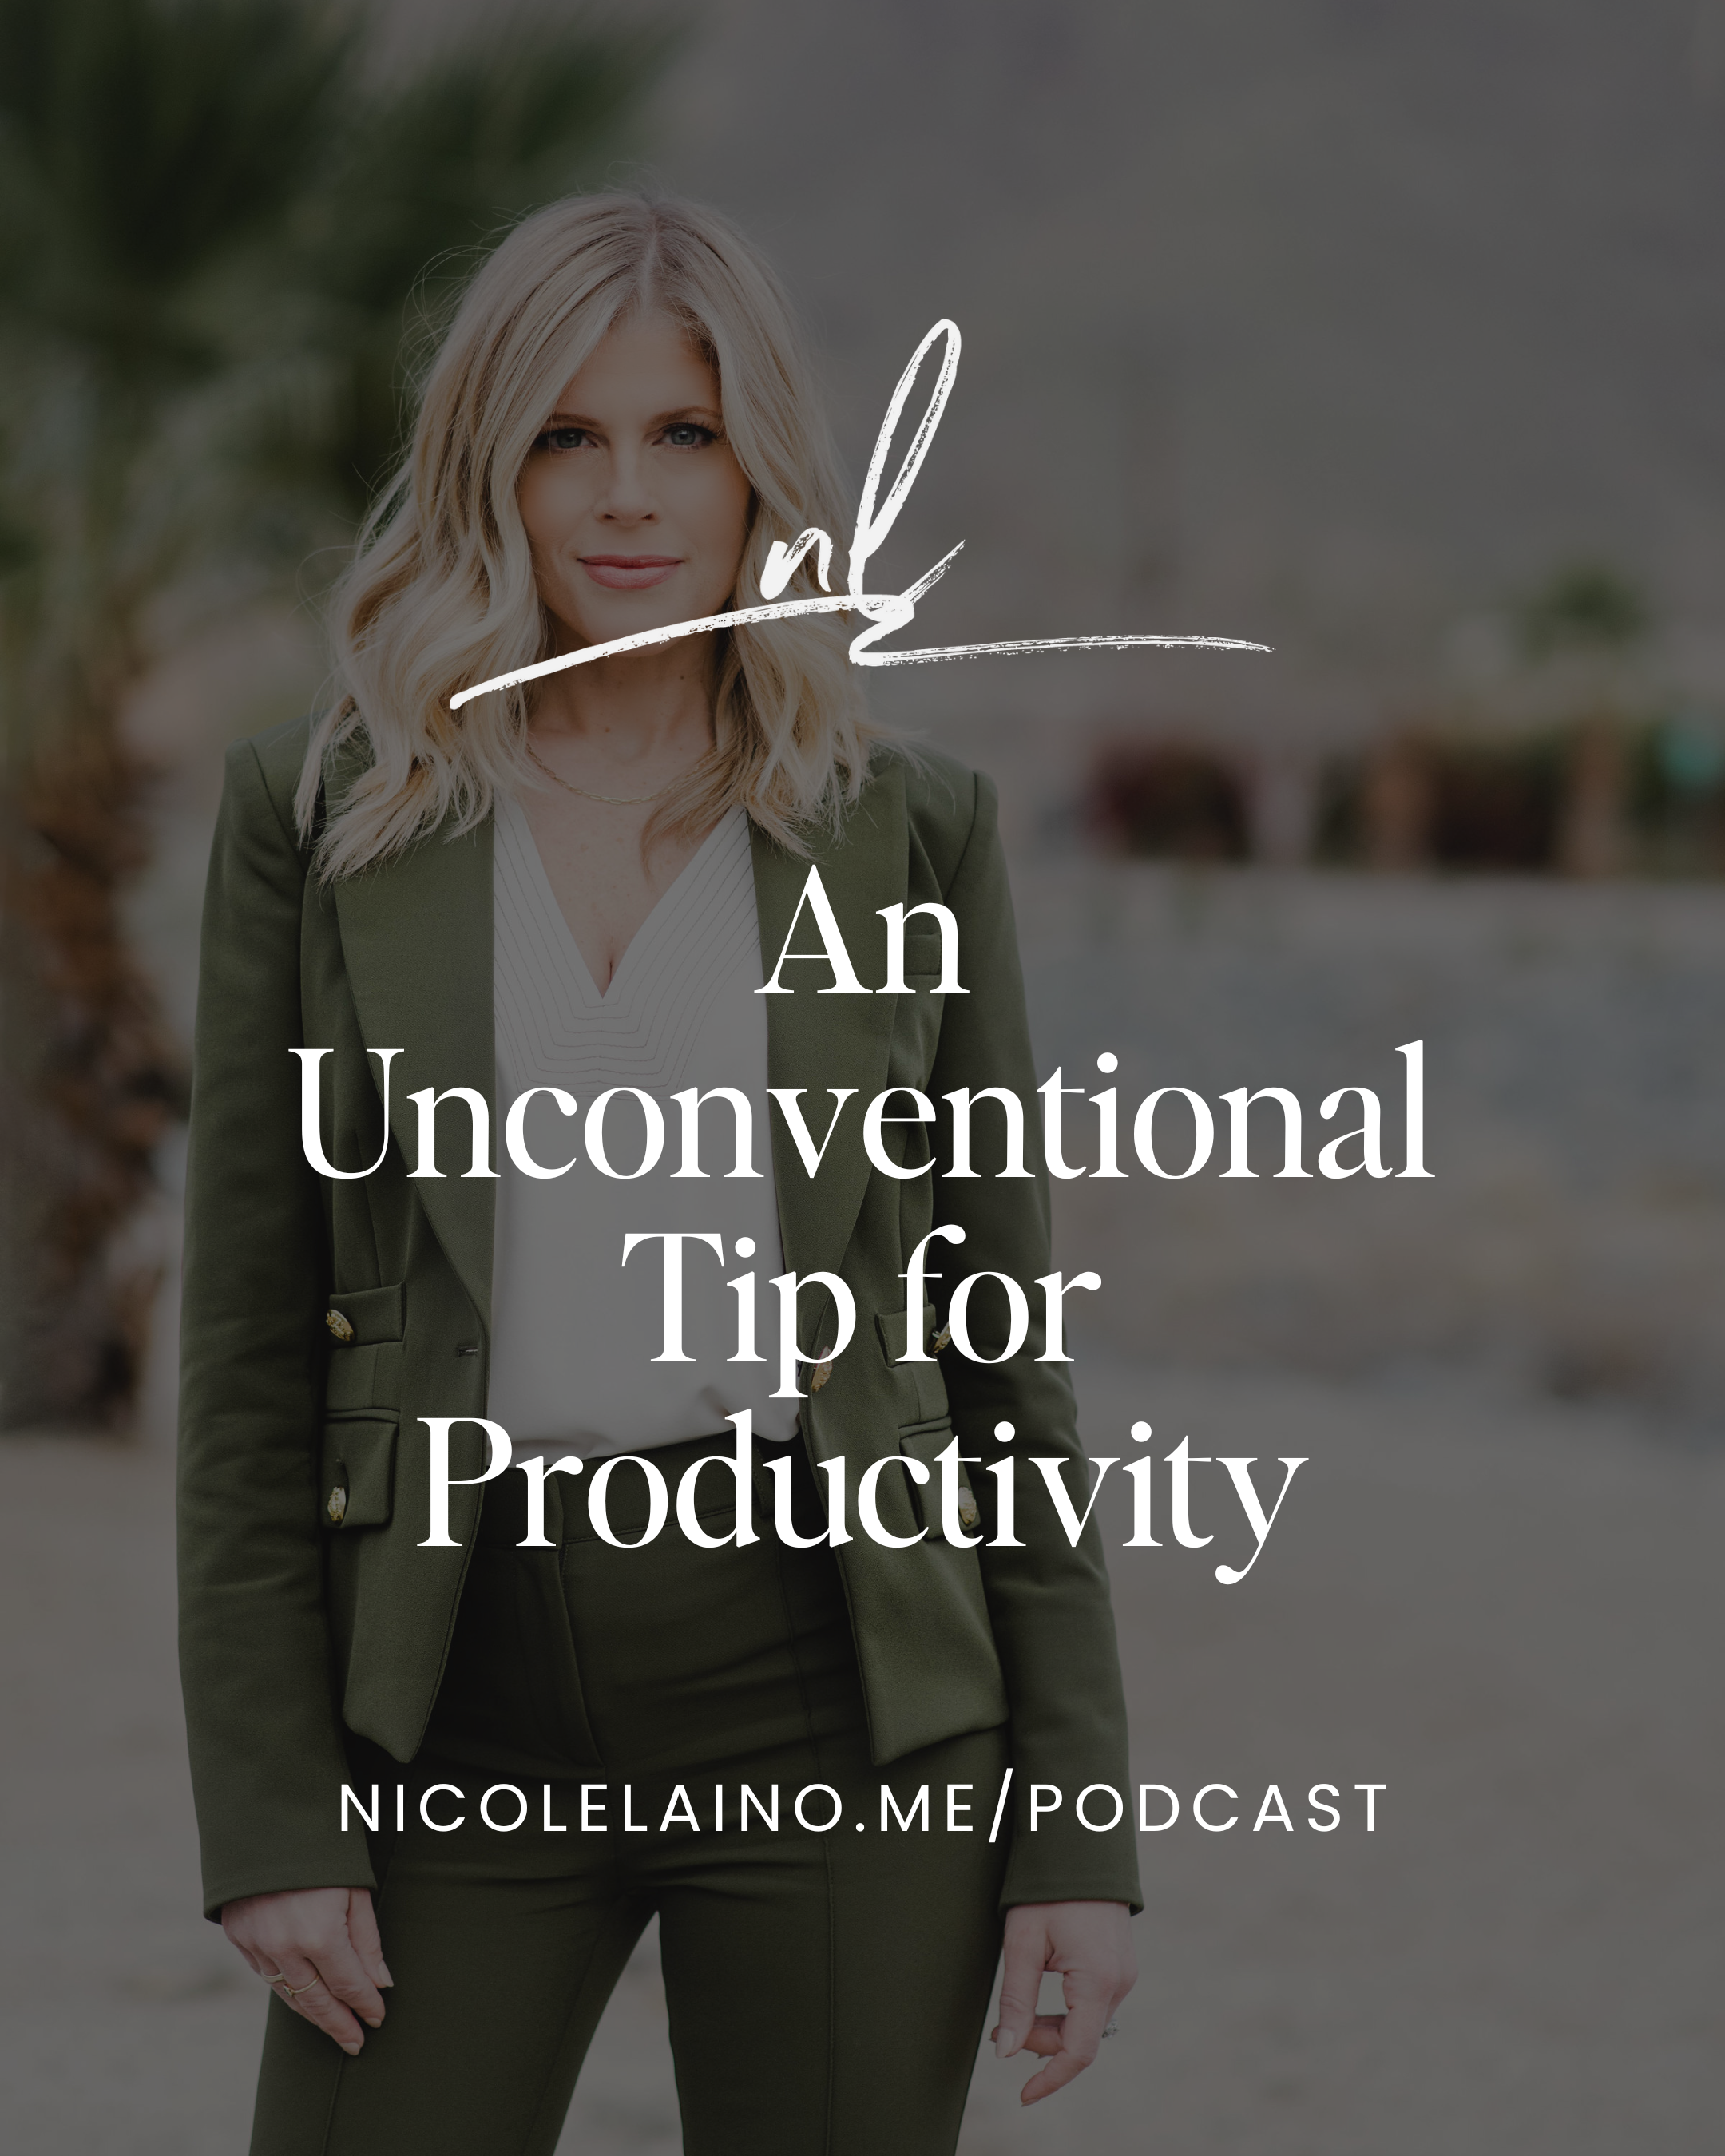 An Unconventional Tip for Productivity